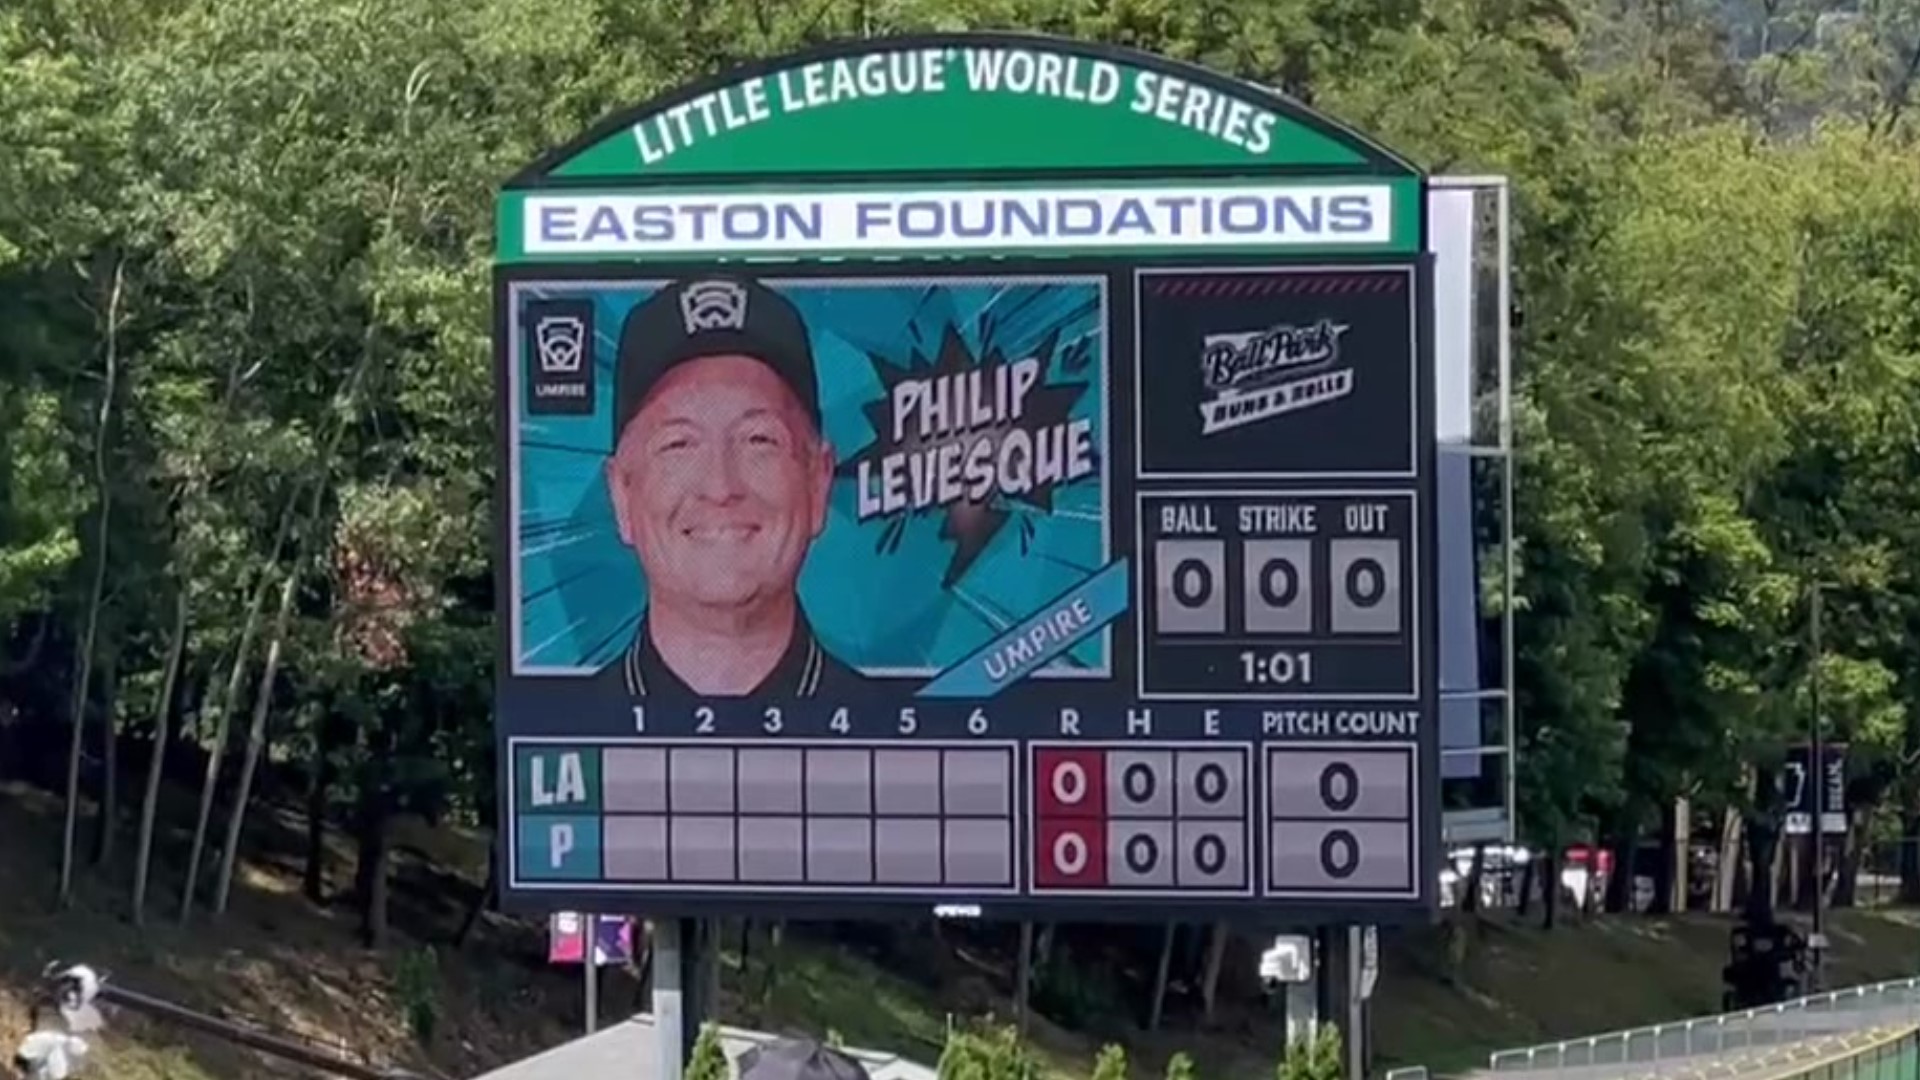 Umpires from around the globe are in South Williamsport making decisive calls at the Little League World Series and one of them has ties to our area.